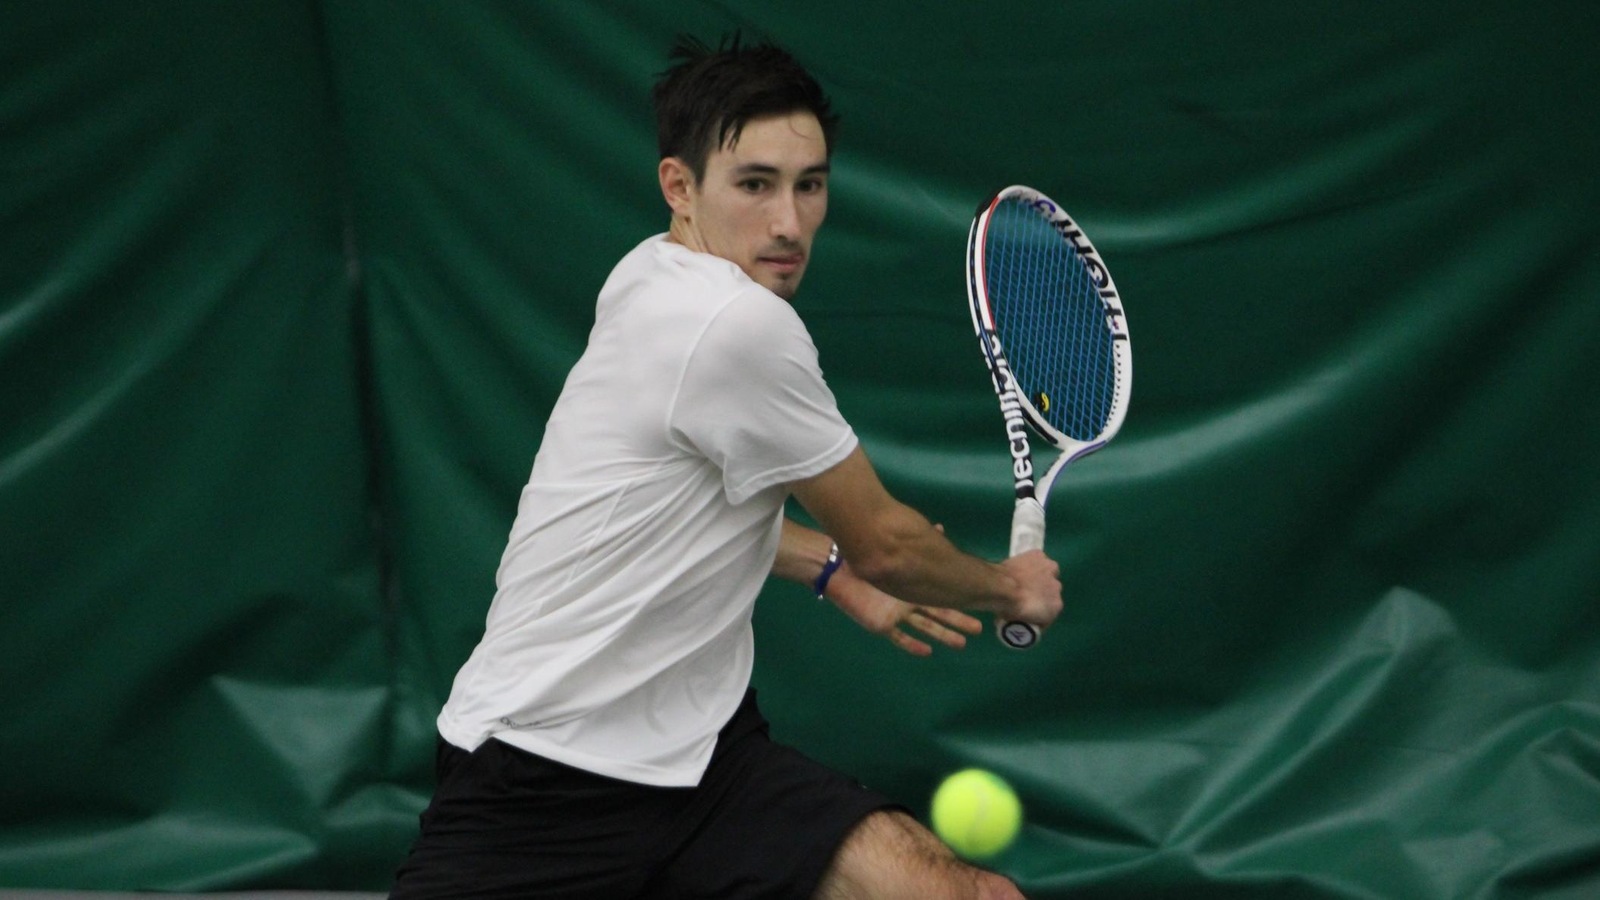 Cleveland State Men’s Tennis Sweeps #HLTennis Weekly Awards For Second Straight Week